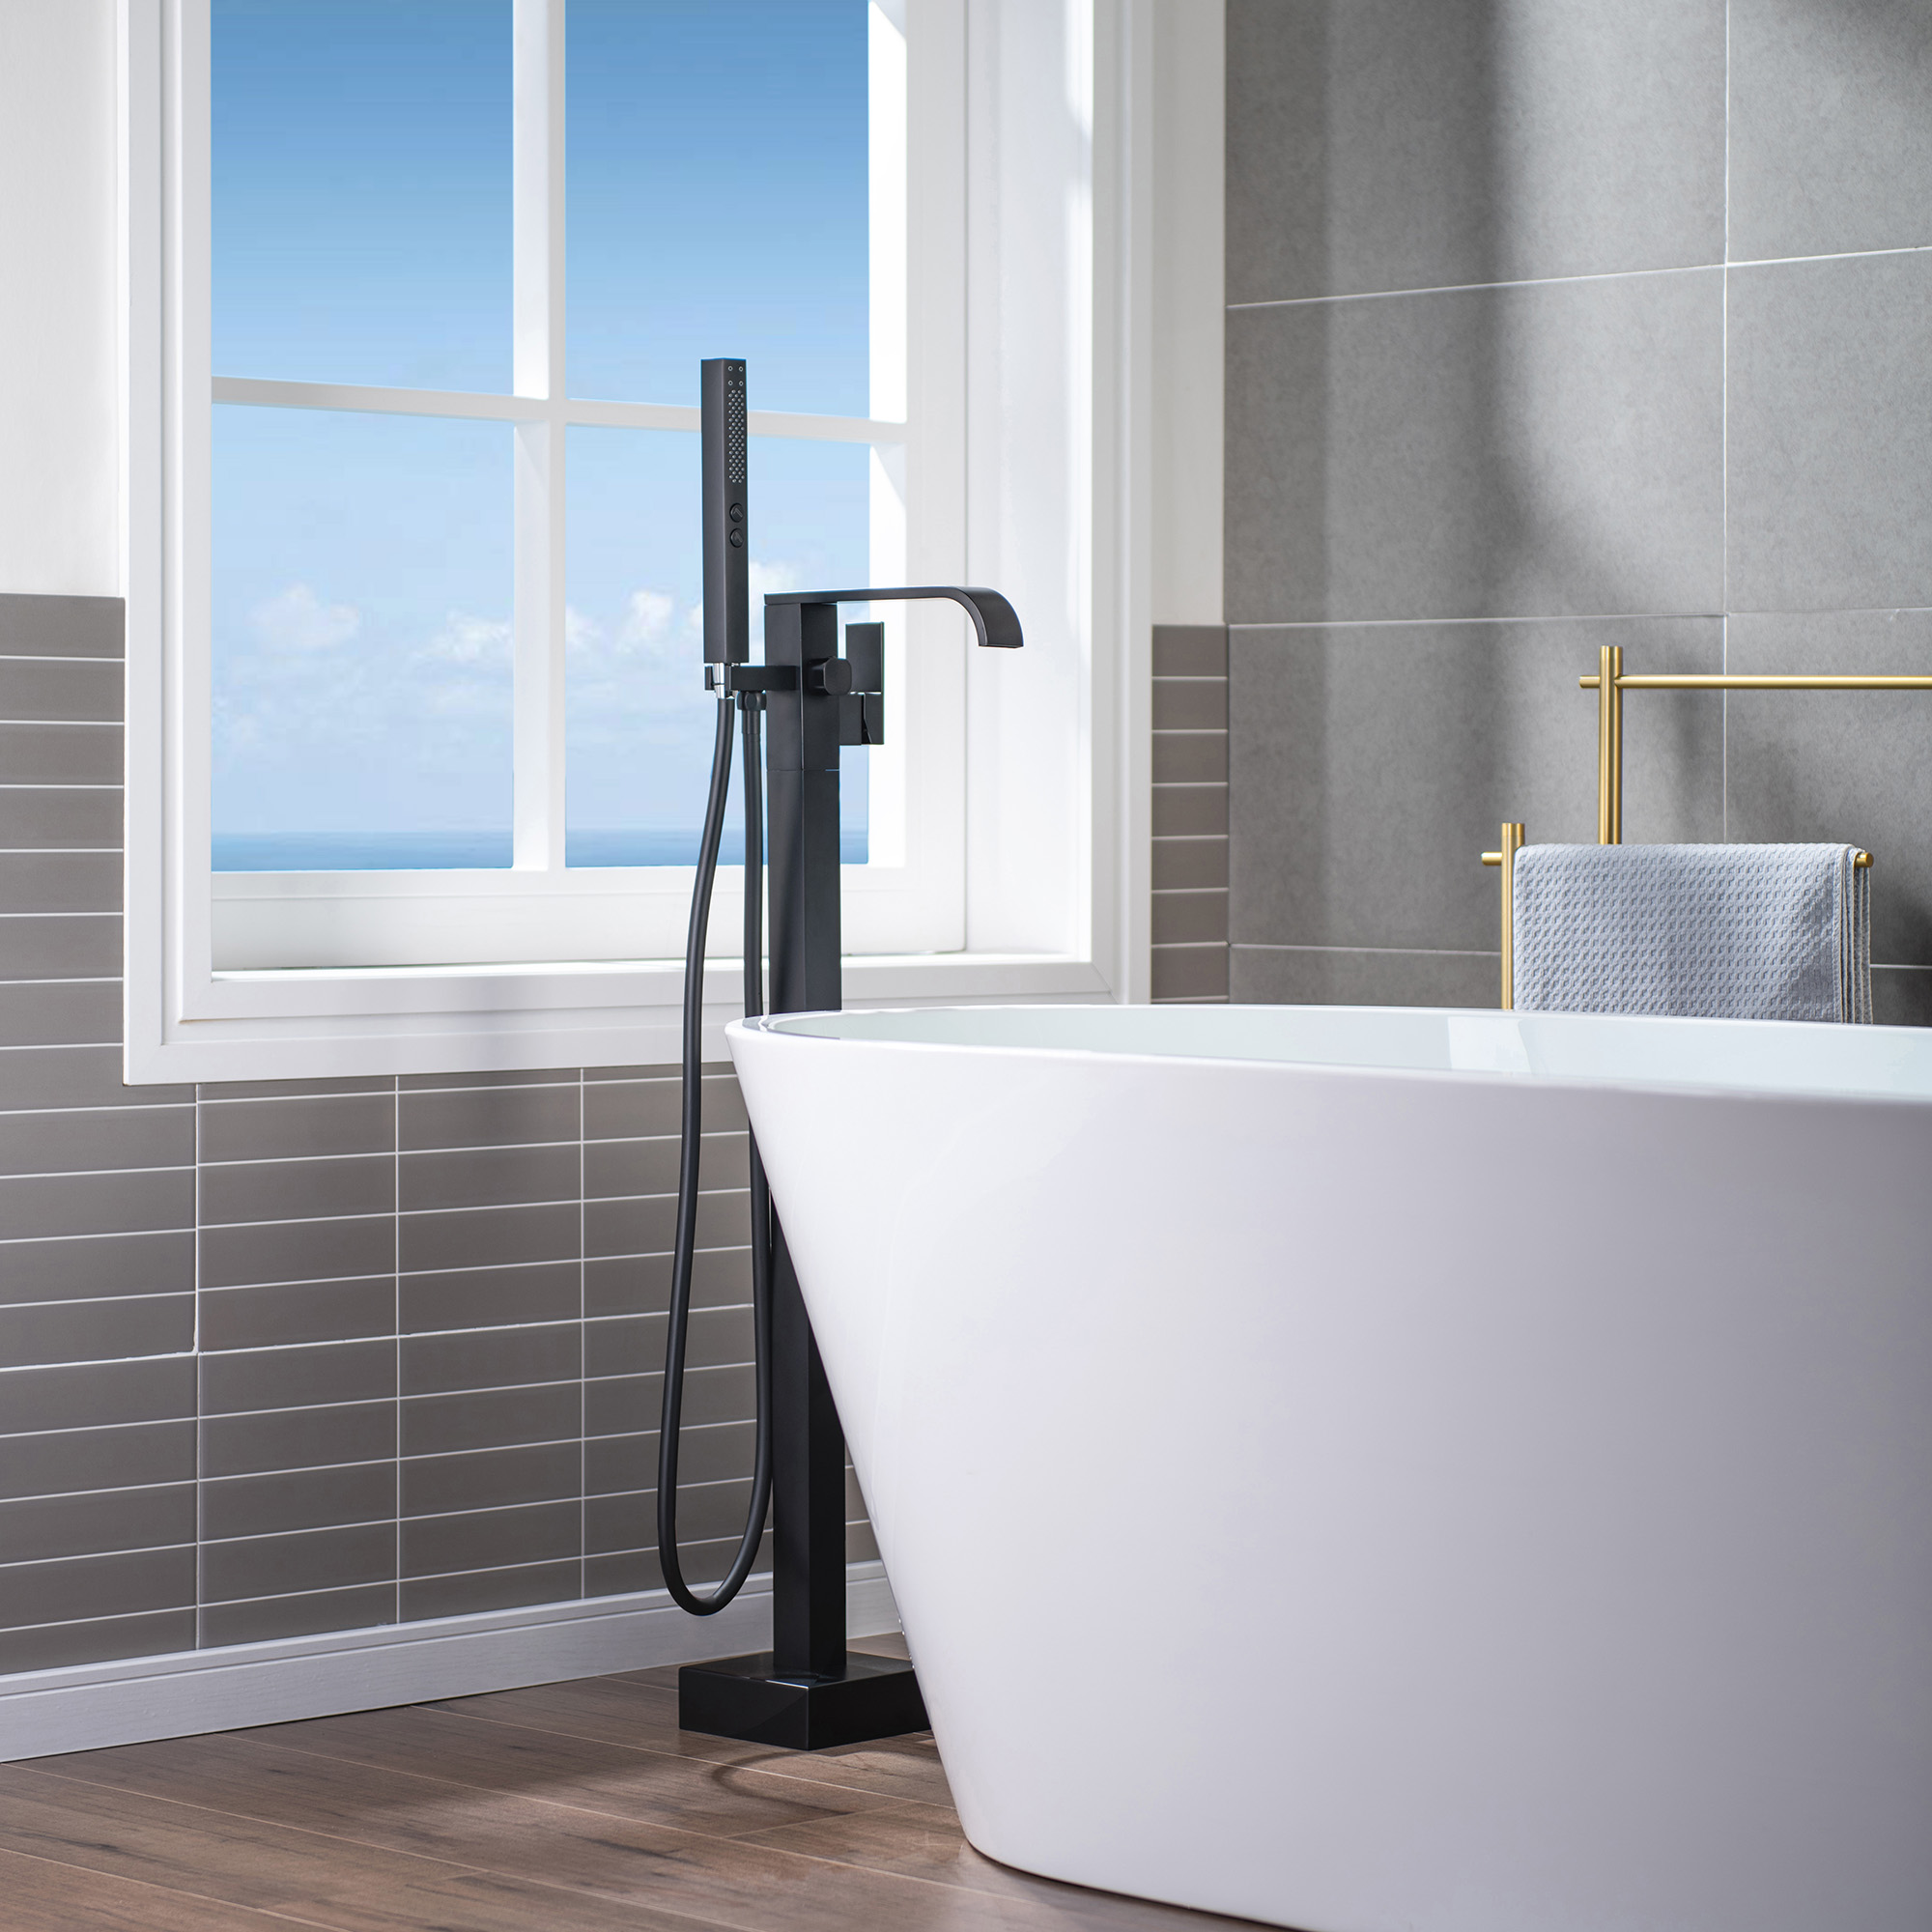  WOODBRIDGE F0037MB Contemporary Single Handle Floor Mount Freestanding Tub Filler Faucet with Hand shower in Matte Black Finish._12241